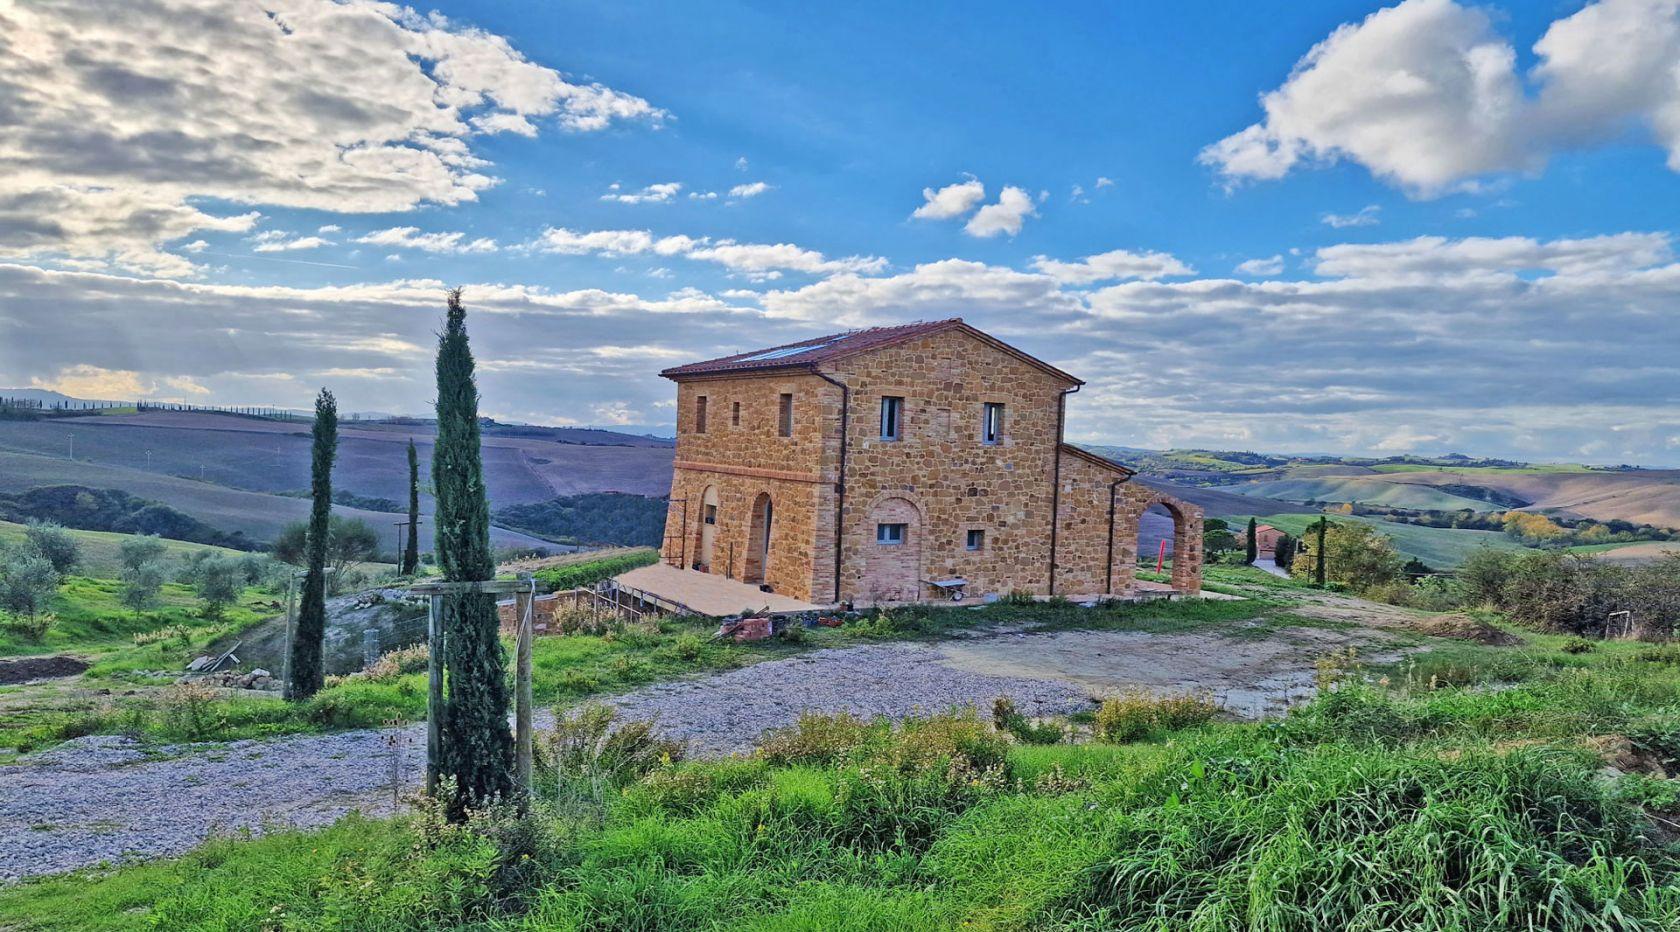 Toscana Immobiliare - Montalcino, in a dominant position, surrounded by the verdant Tuscan countryside and the characteristic Crete Senesi, this charming farmhouse is for sale.